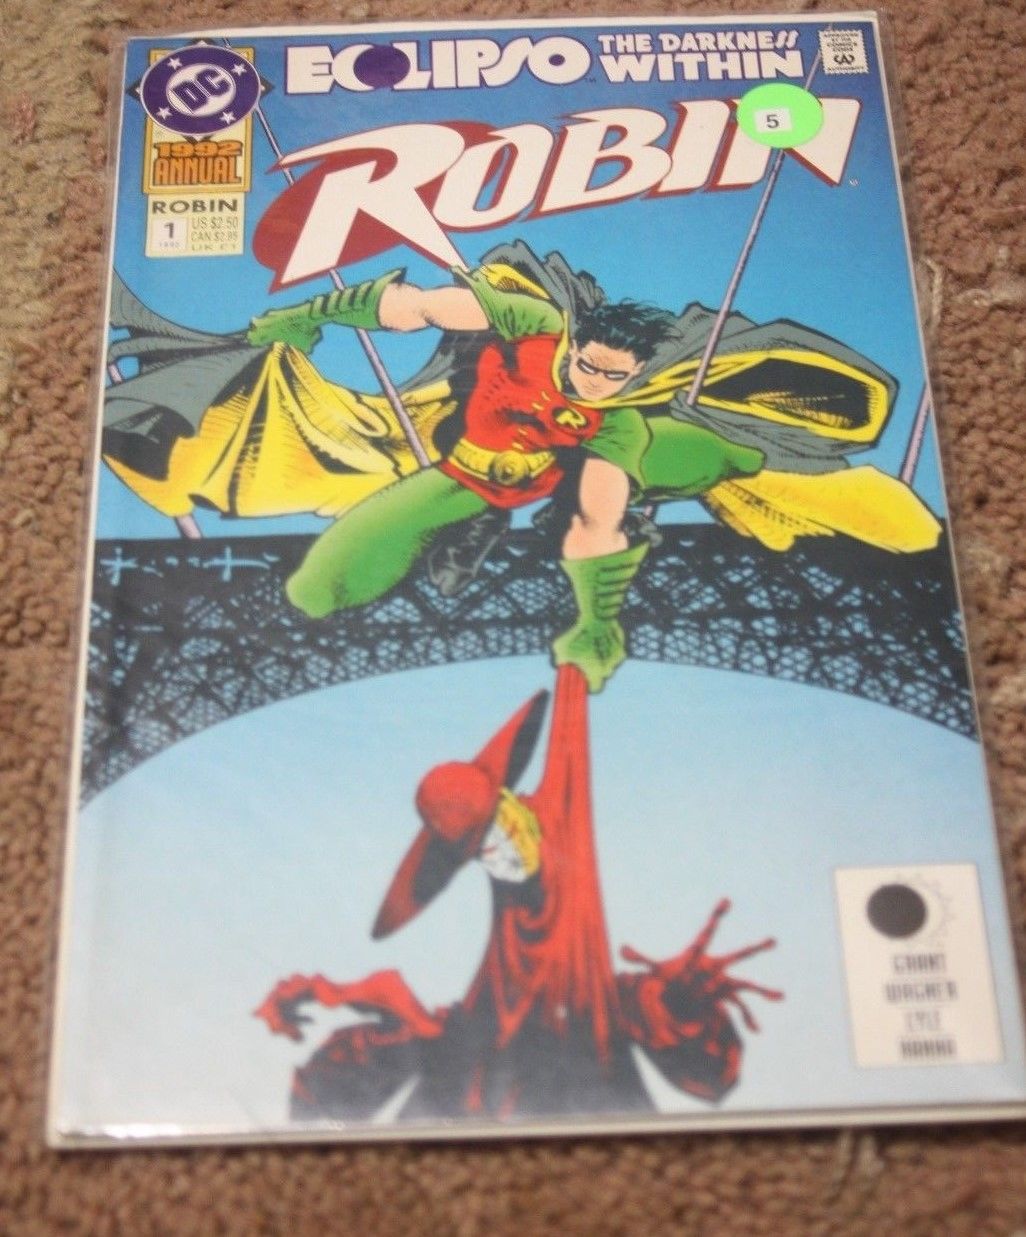 Details about  / 1992 ROBIN #1 ANNUAL ECLIPSO DARKNESS WITHIN DC COMICS FINE+